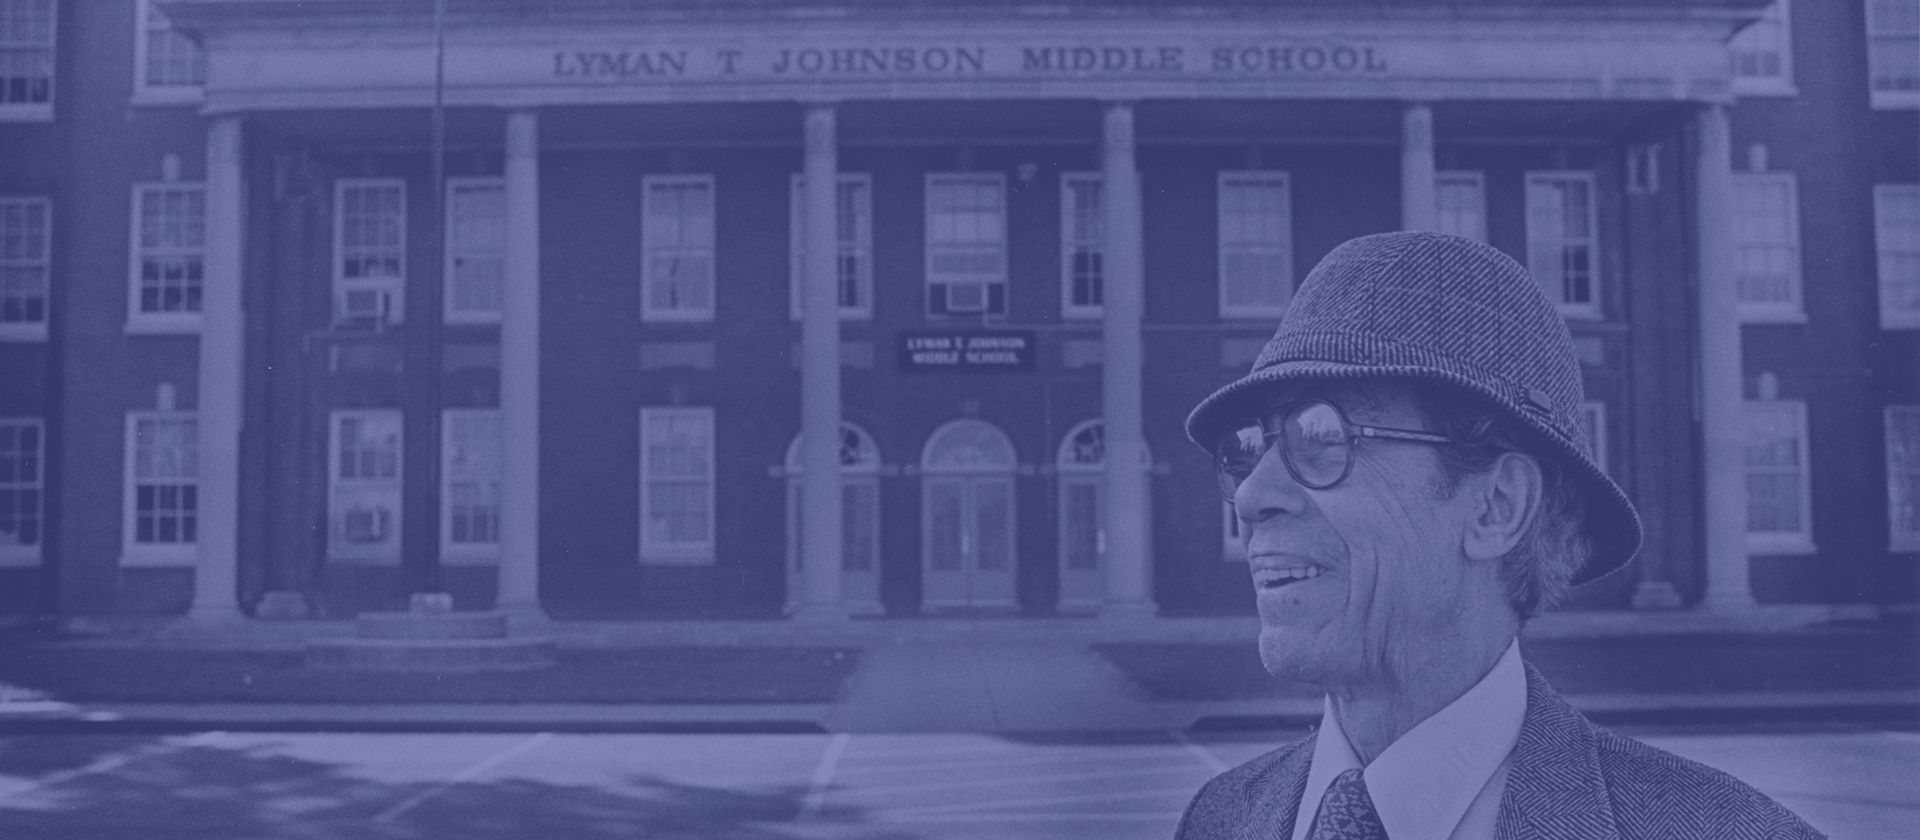 Lyman T. Johnson standing in front of school named after him.